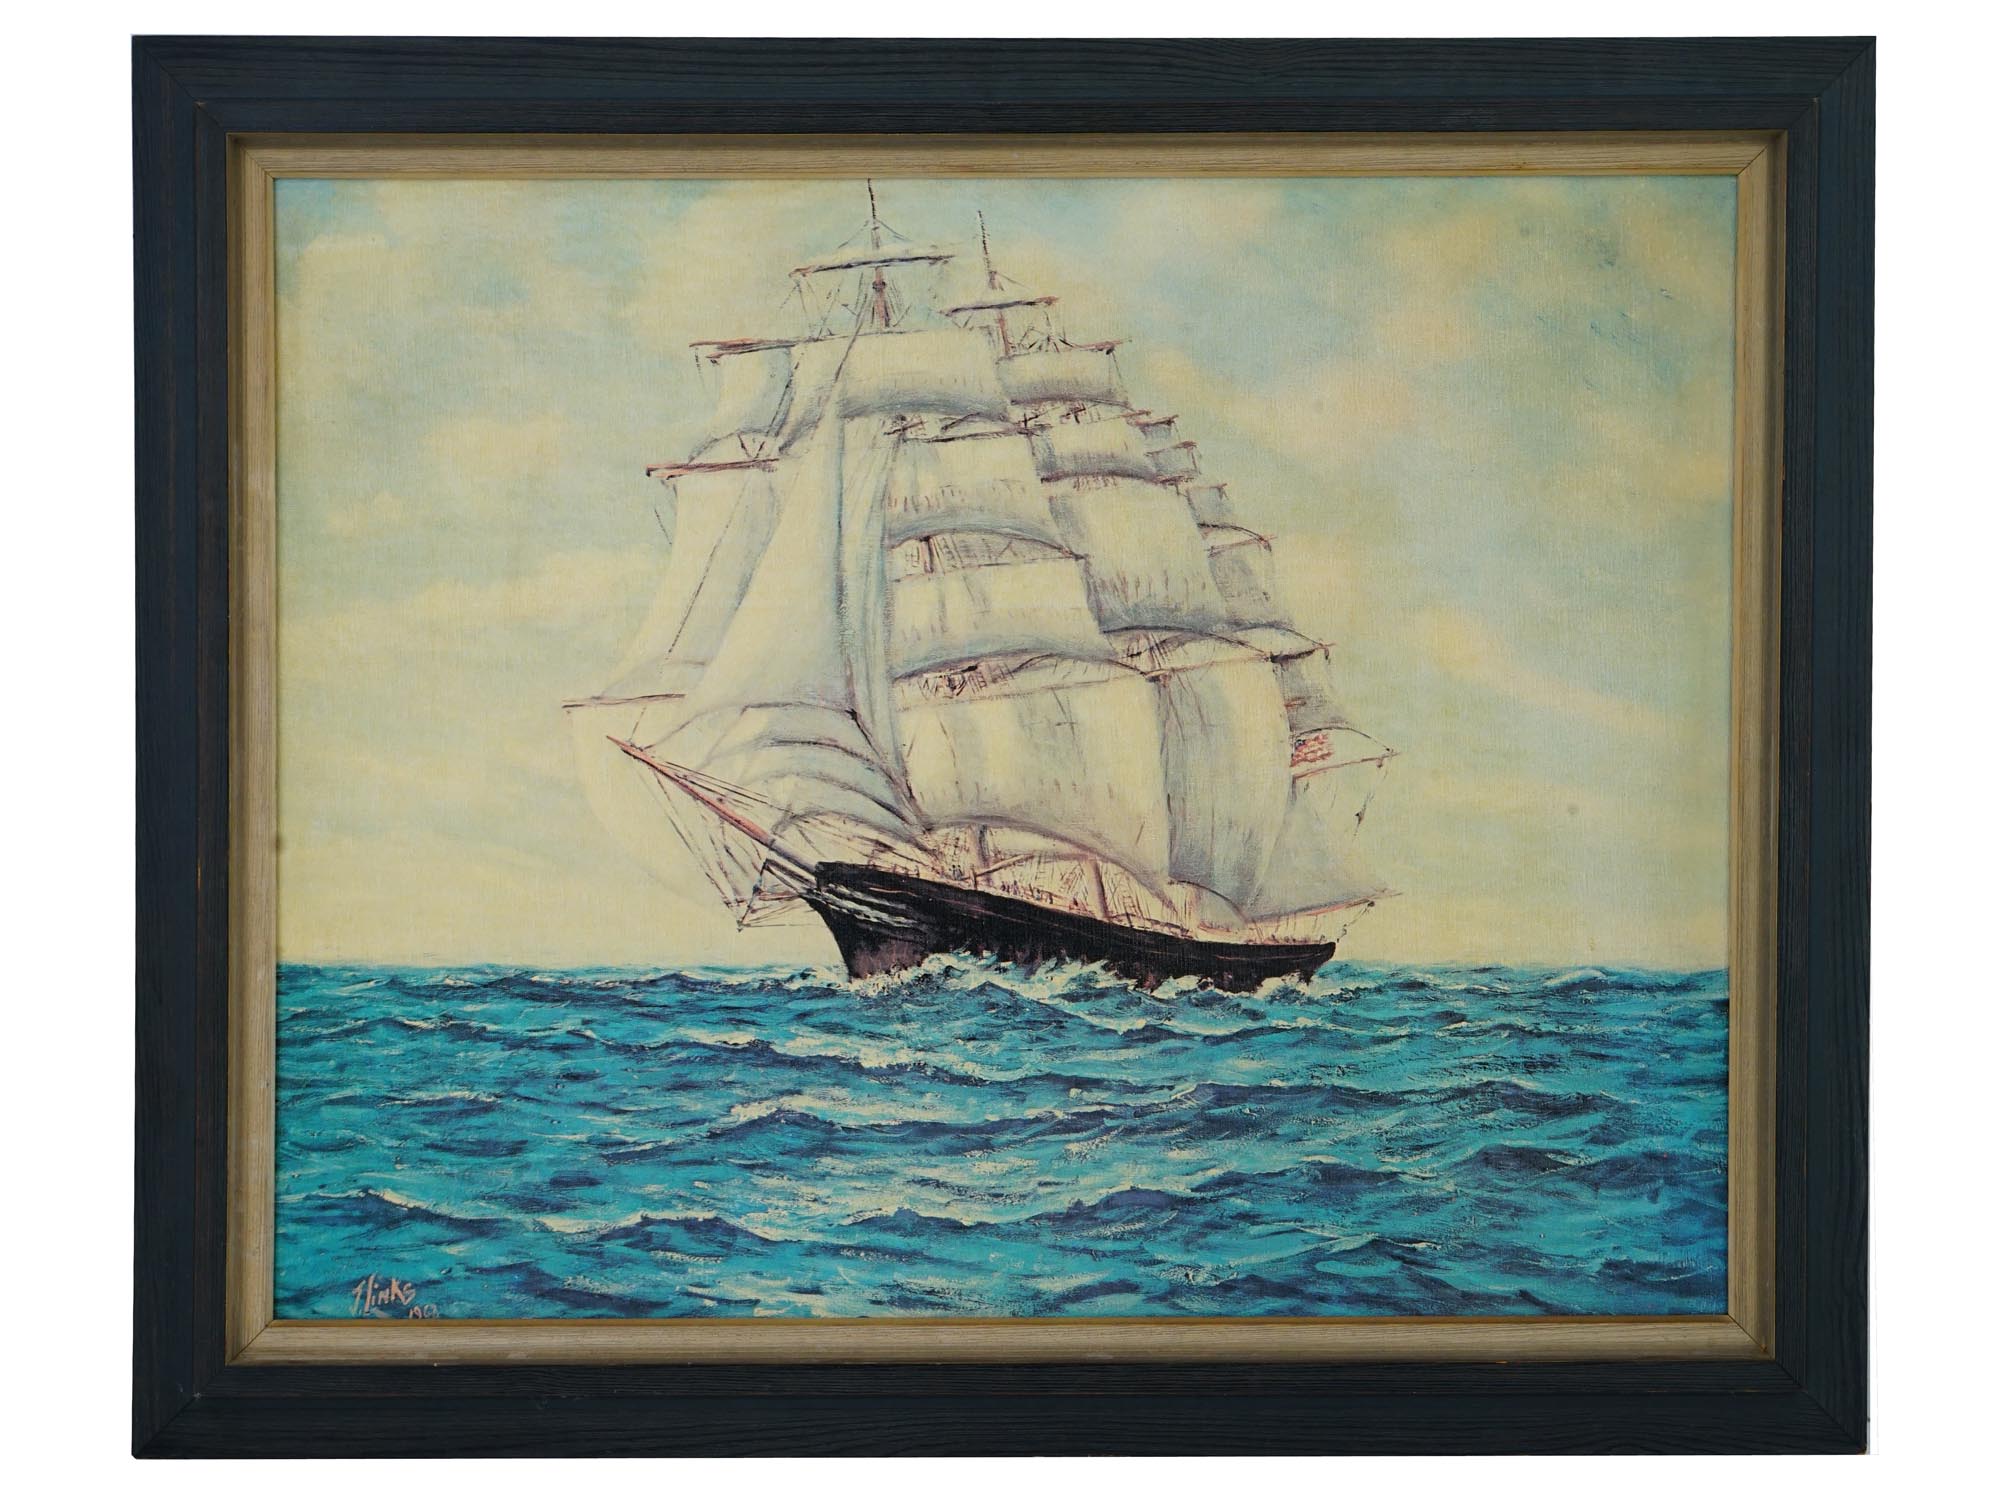 MID CENT AMERICAN NAUTICAL PRINT ON CANVAS BY J. LINKS PIC-0